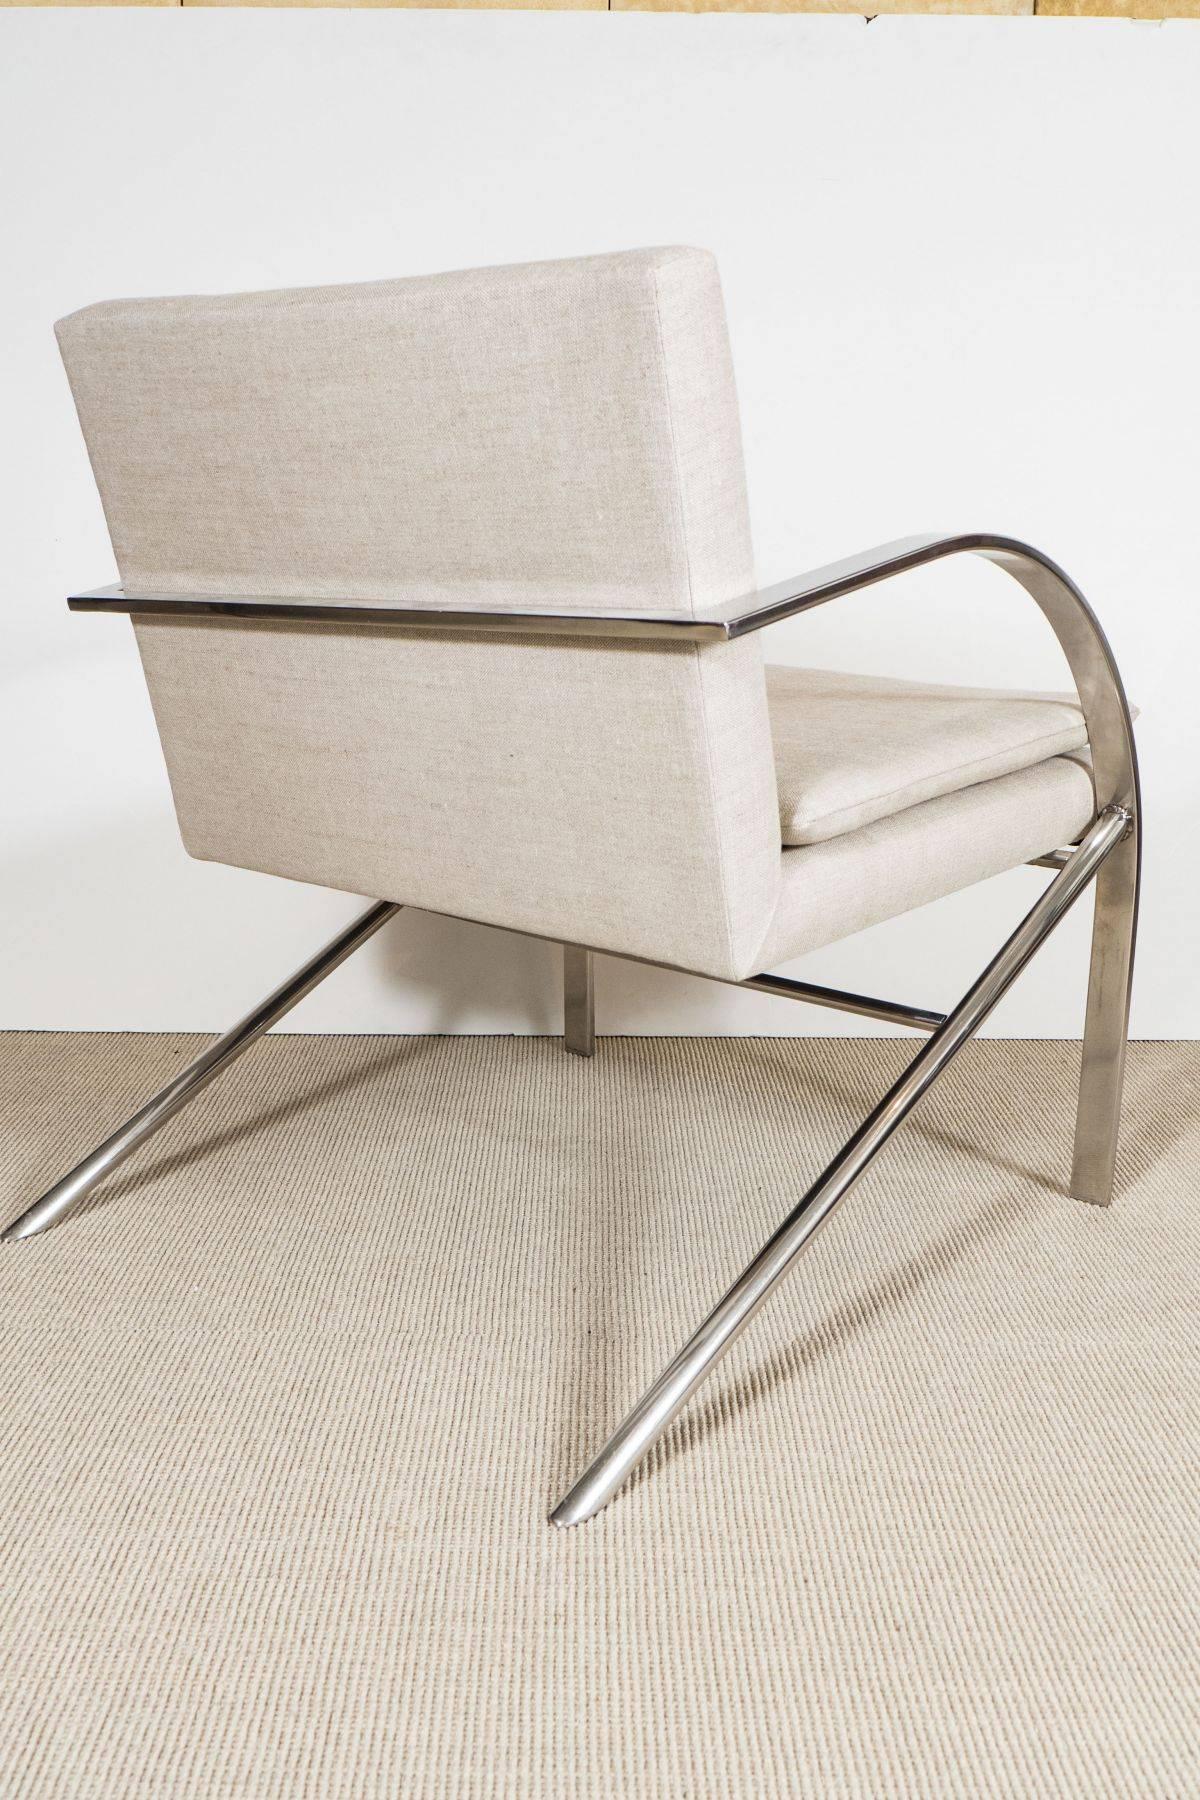 Chrome Chair by Paul Tuttle, USA, circa 1950 In Good Condition For Sale In New York, NY